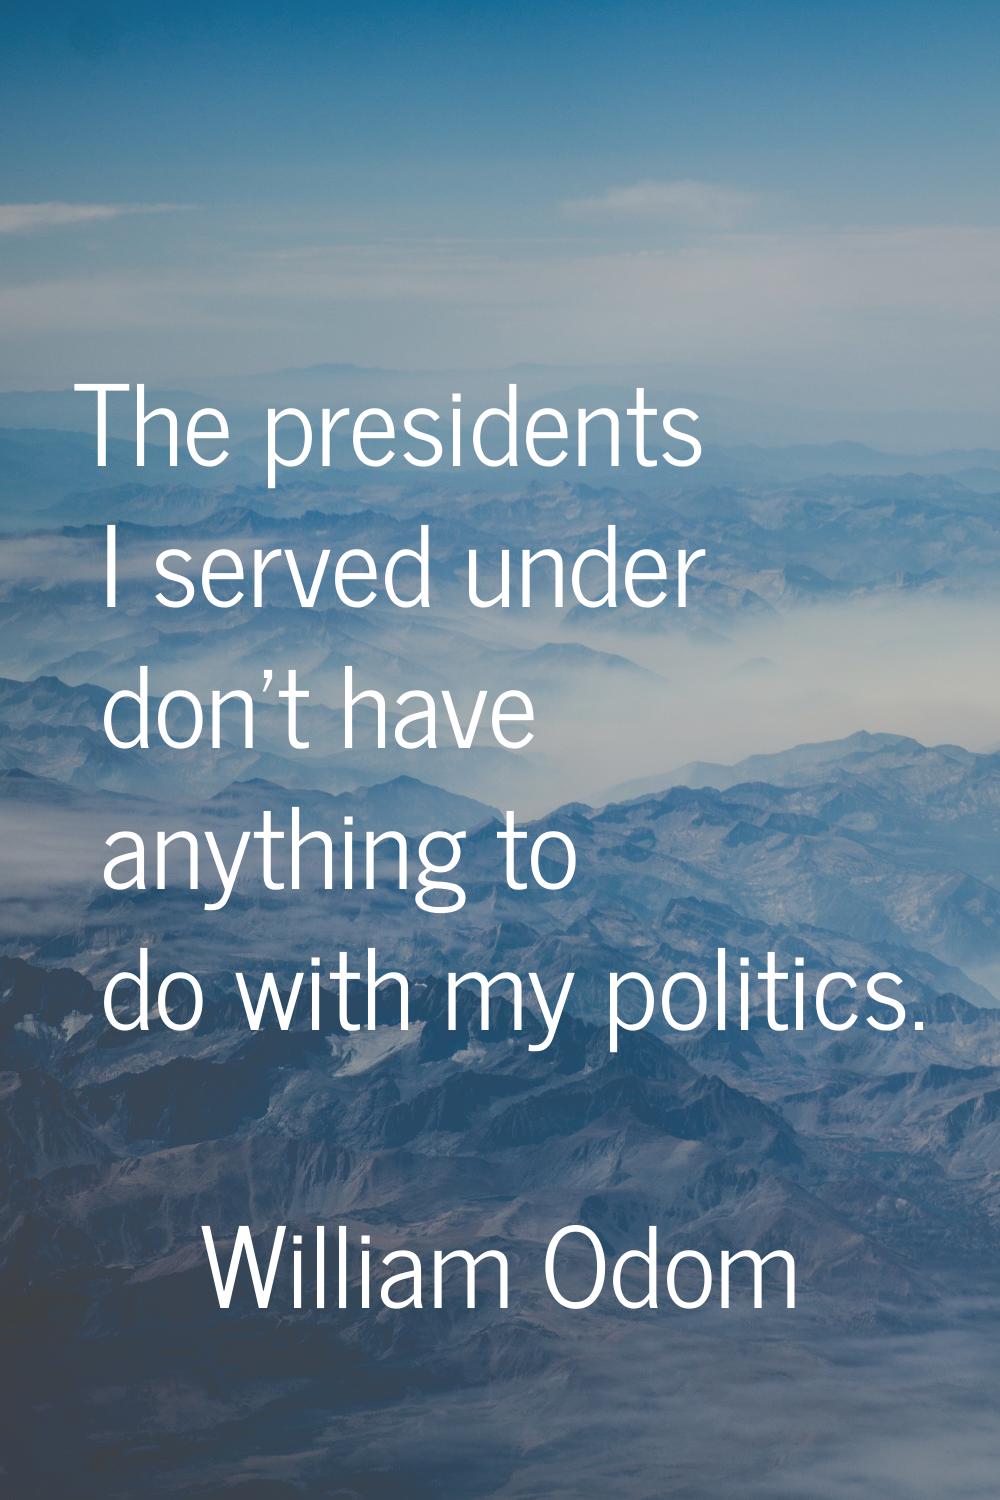 The presidents I served under don't have anything to do with my politics.